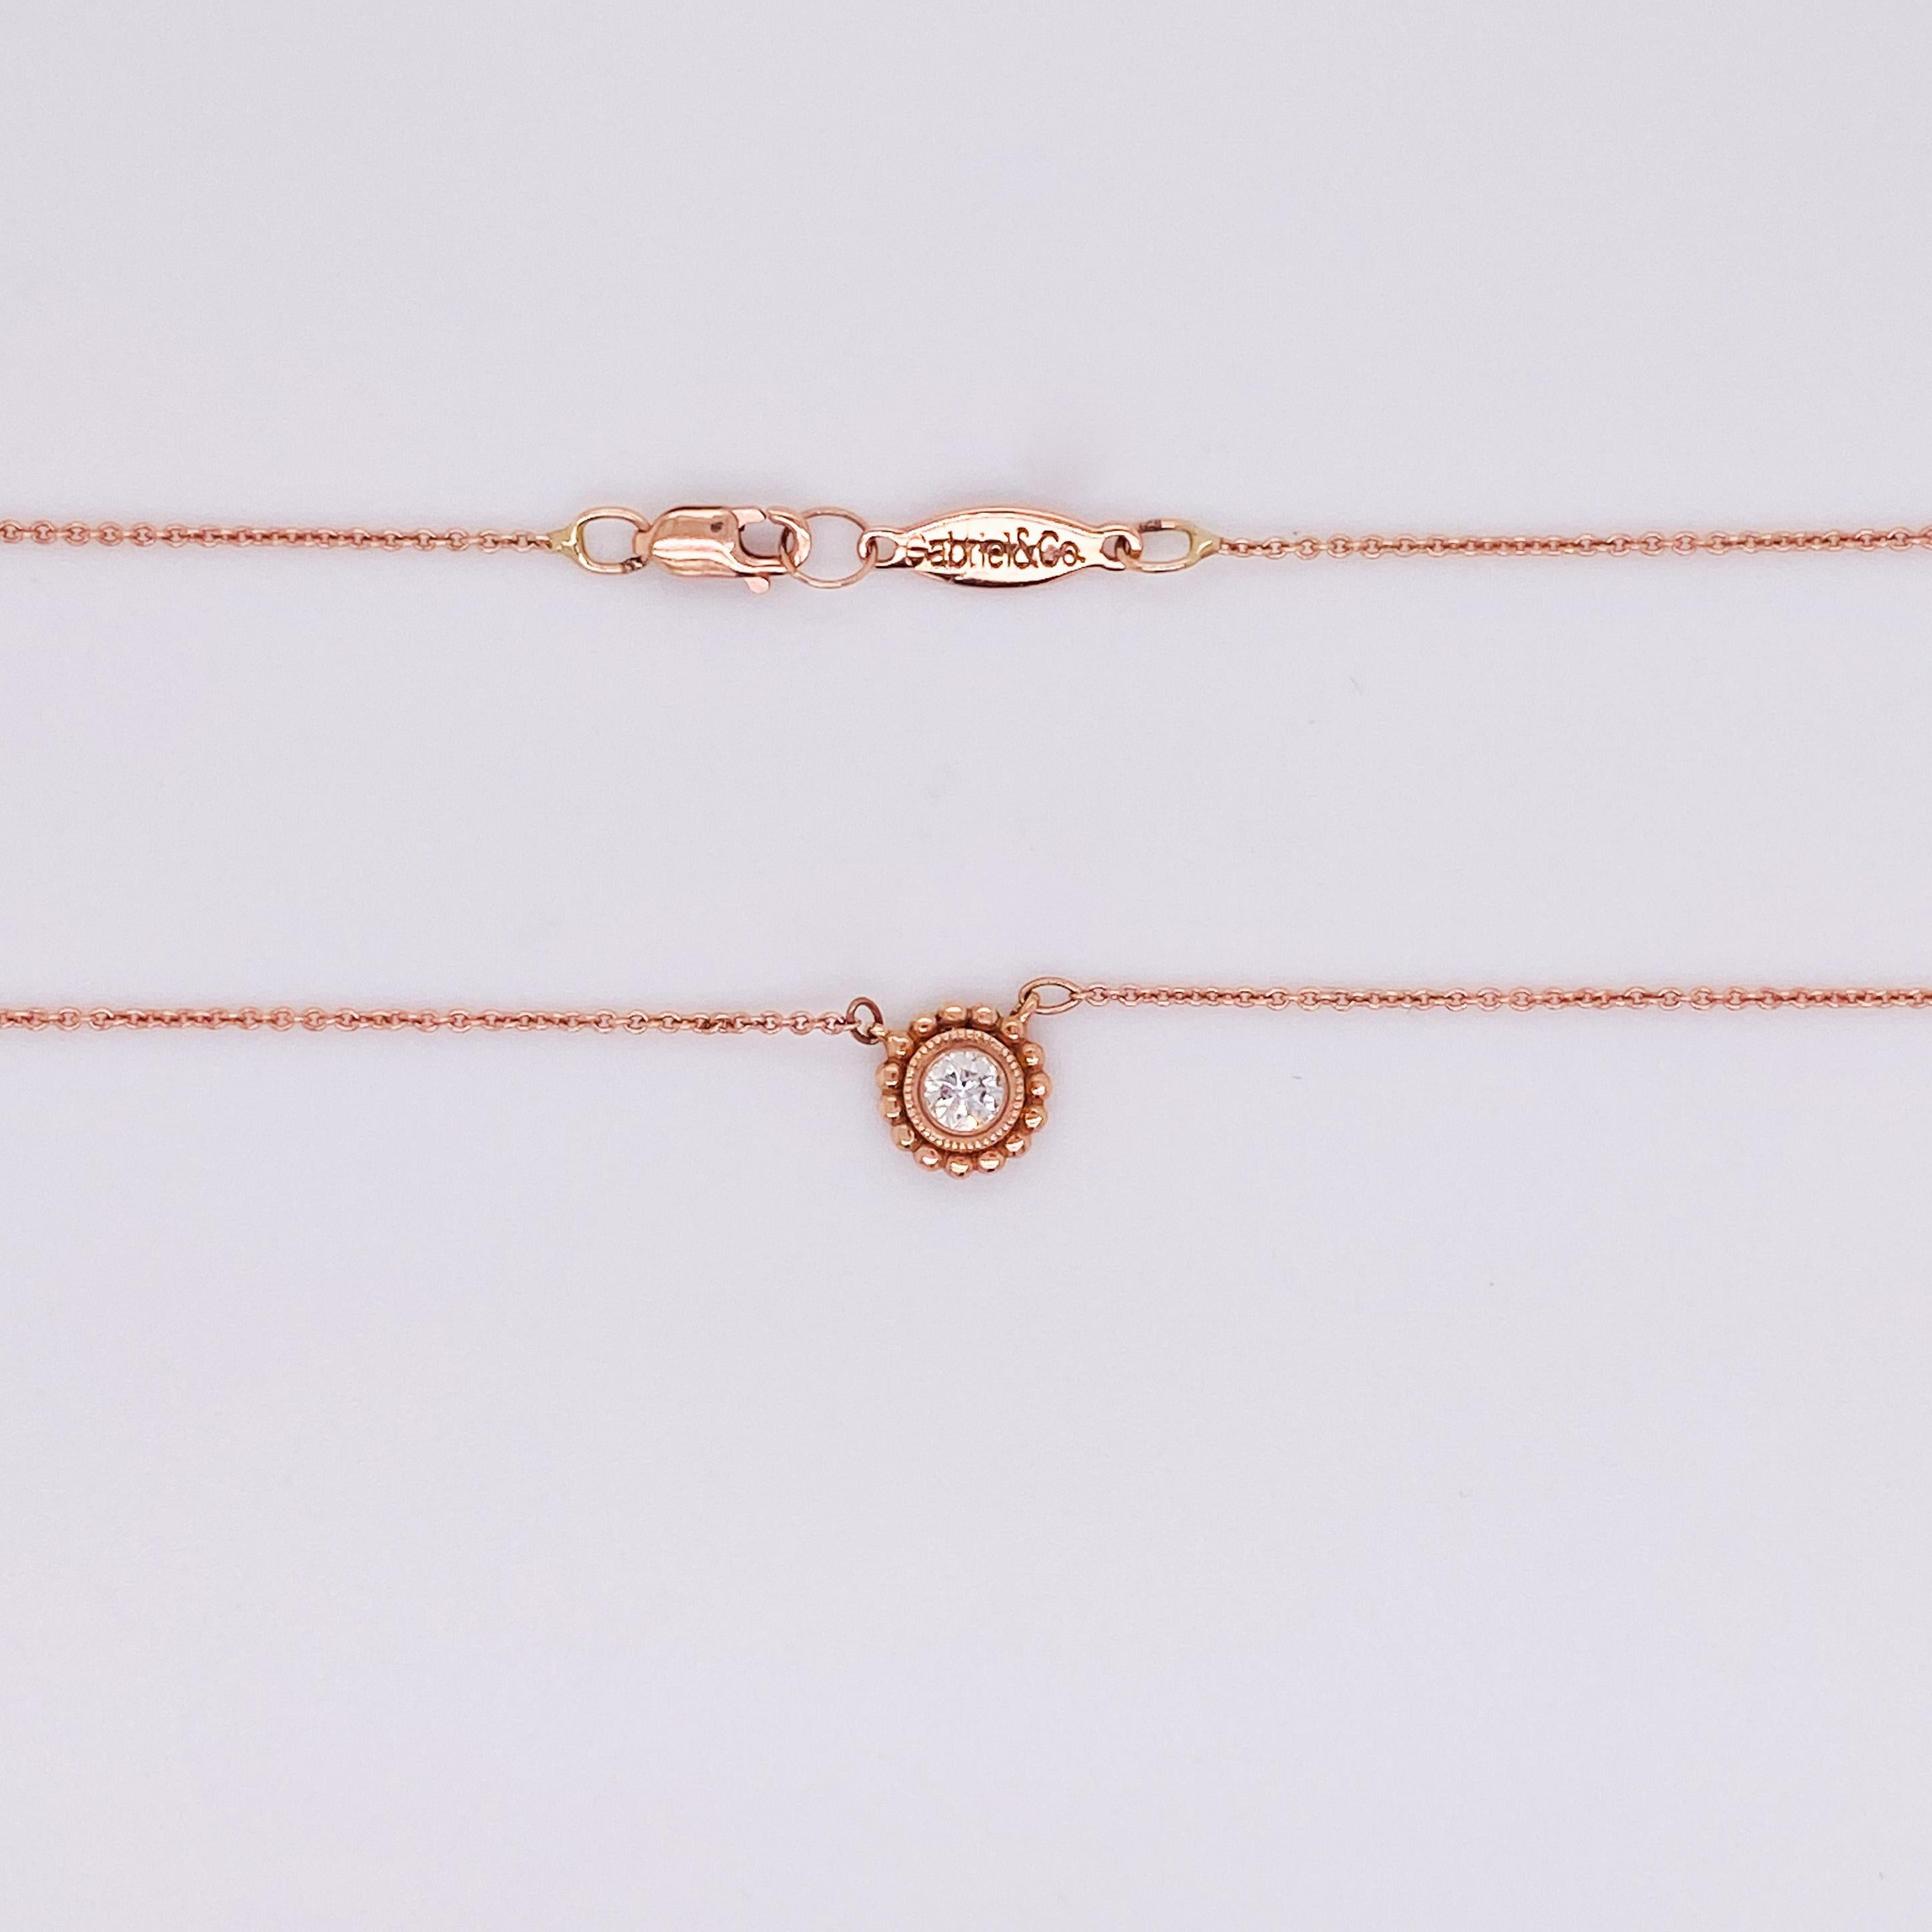 Contemporary Dainty Diamond Daisy Necklace .12 Carats in 14K Rose Gold, April Birthstone LV For Sale